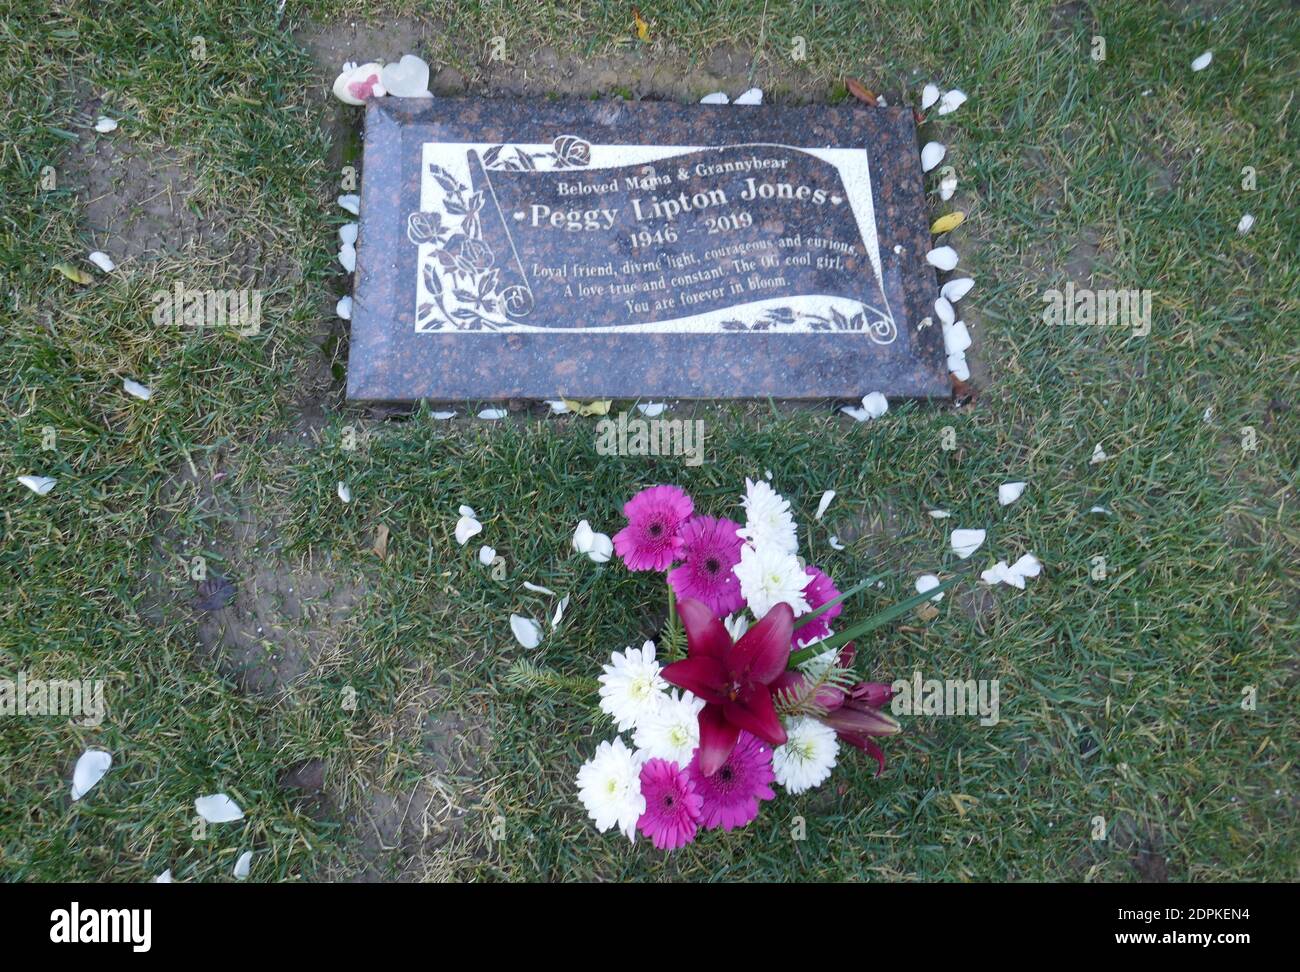 Culver City, California, USA 18th December 2020 A general view of atmosphere of actress Peggy Lipton's Grave at Hillside Memorial Park on December 18, 2020 in Culver City, California, USA. Photo by Barry King/Alamy Stock Photo Stock Photo